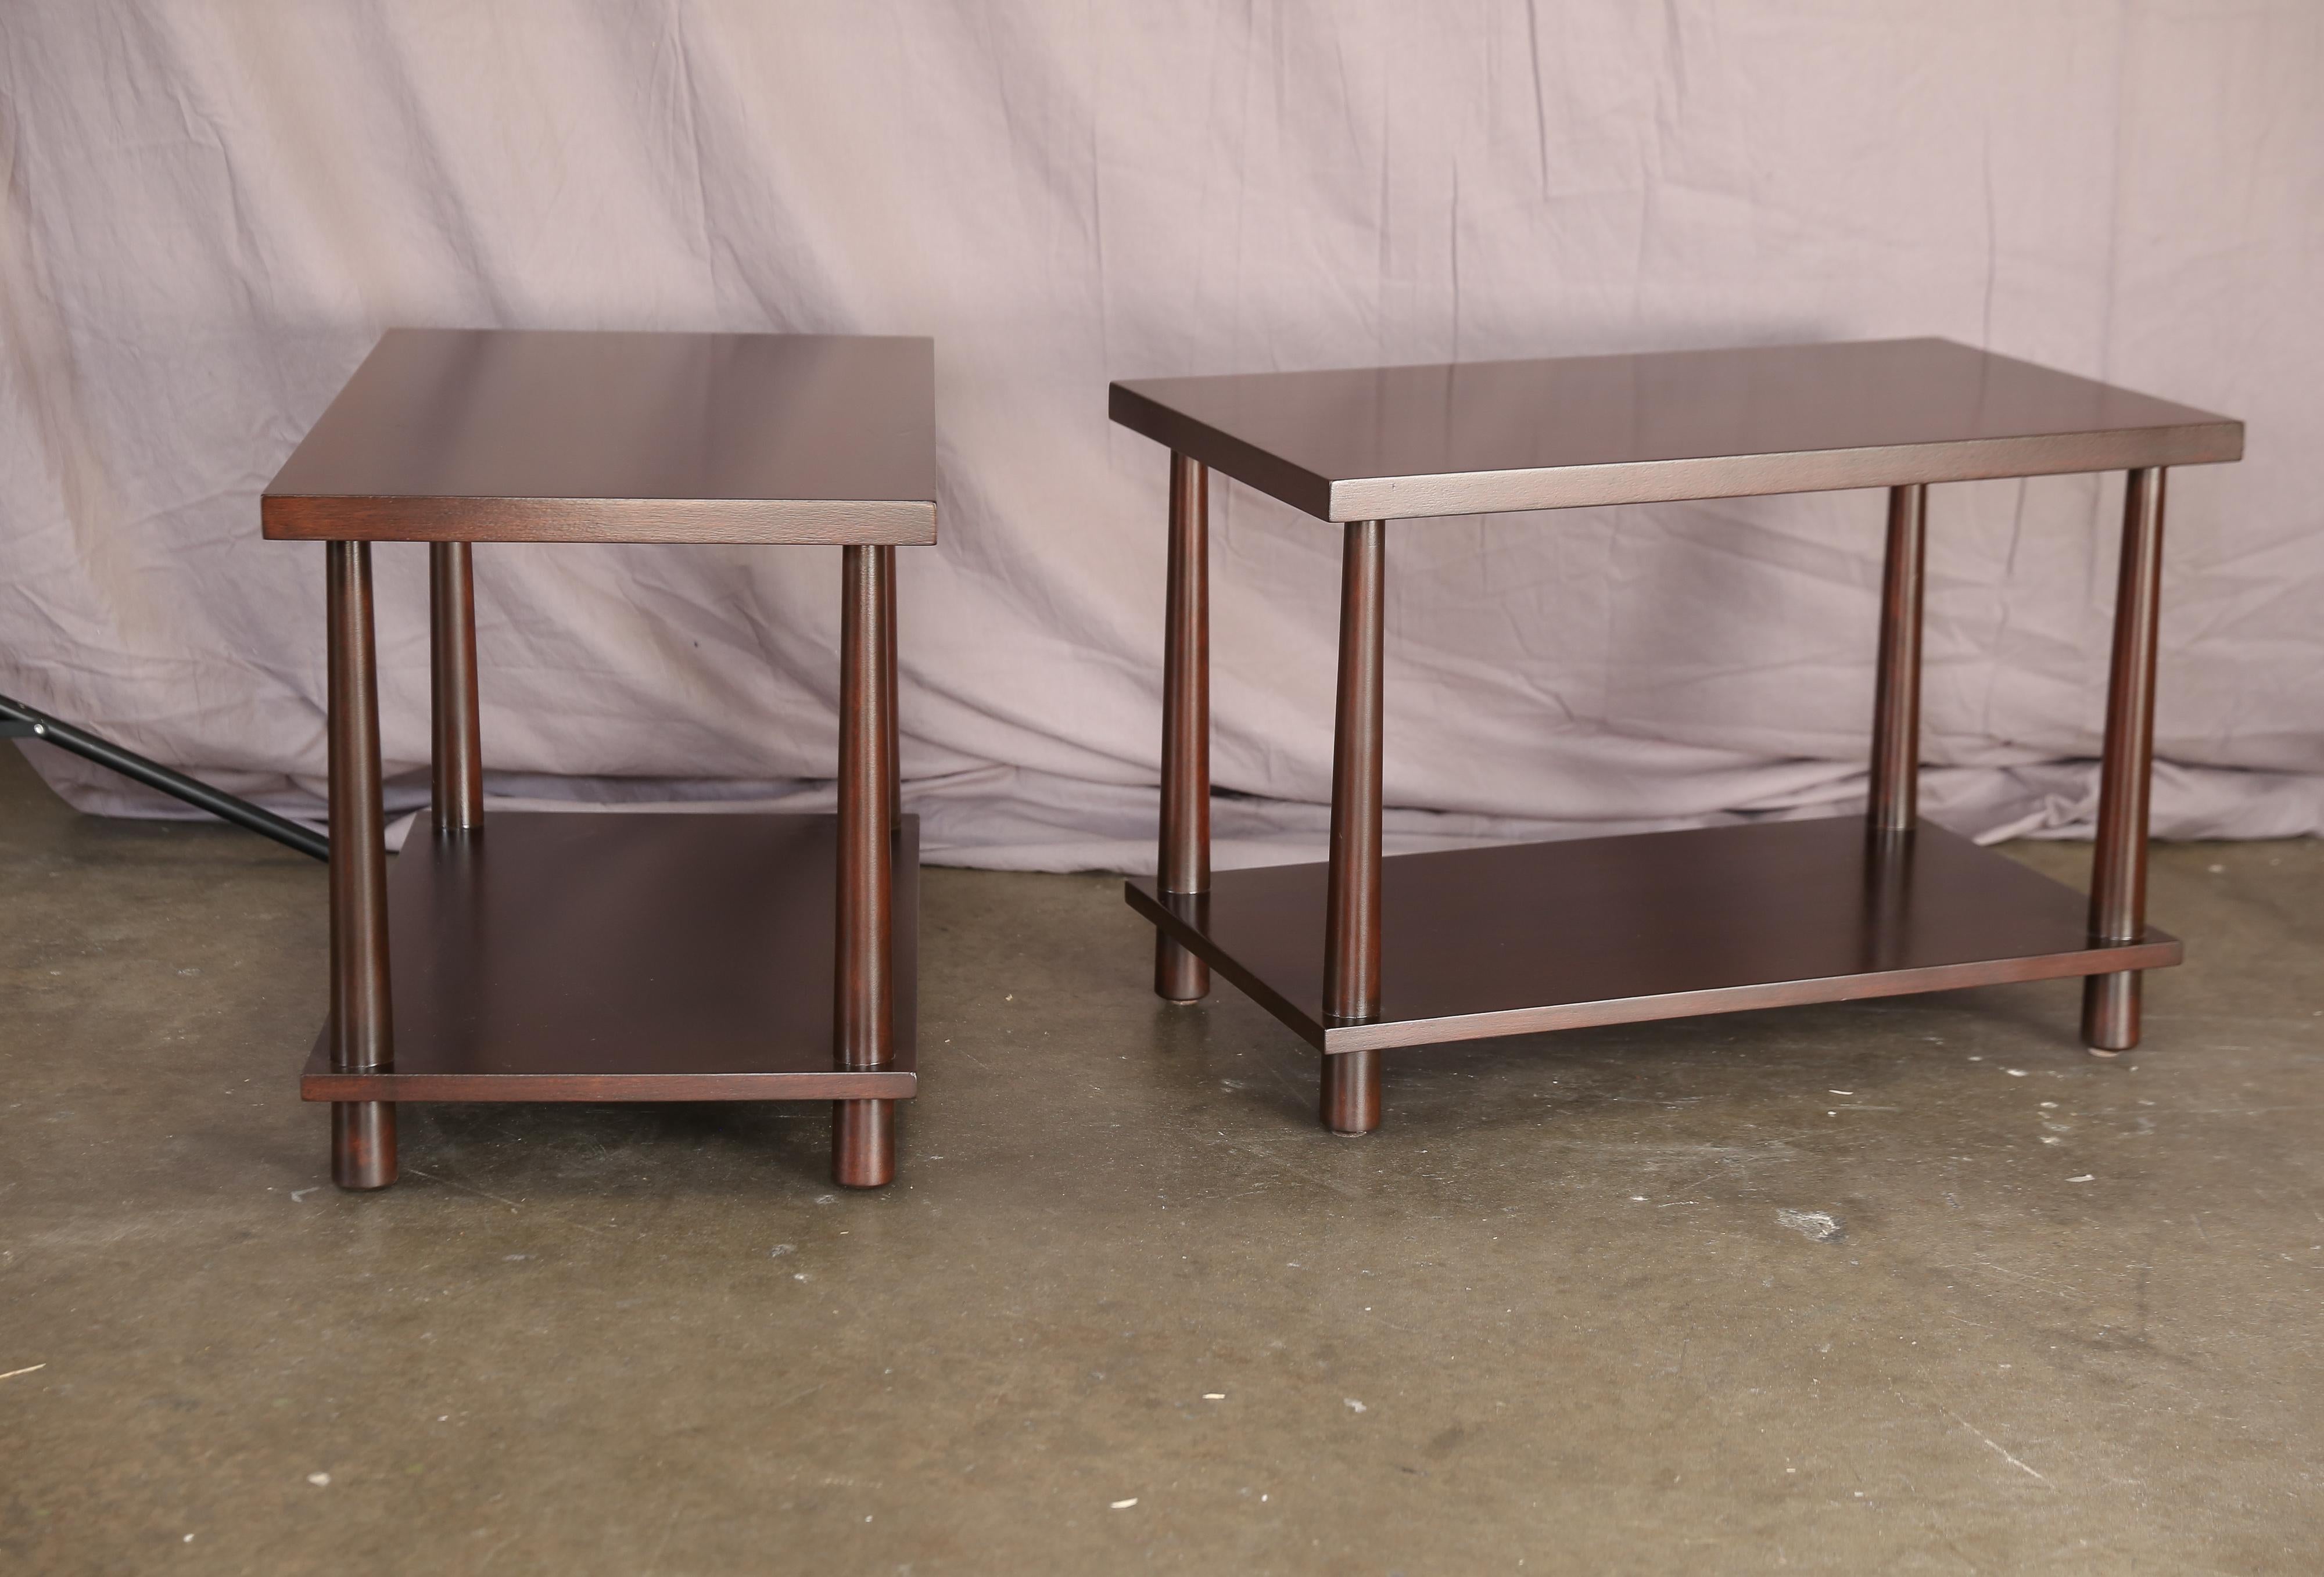 T.H.Robsjohn-Gibbings reverse tapper side tables for Widdicomb. From Gibbings production series of the late 1940s-1950s, are these elegant side tables in walnut finish.